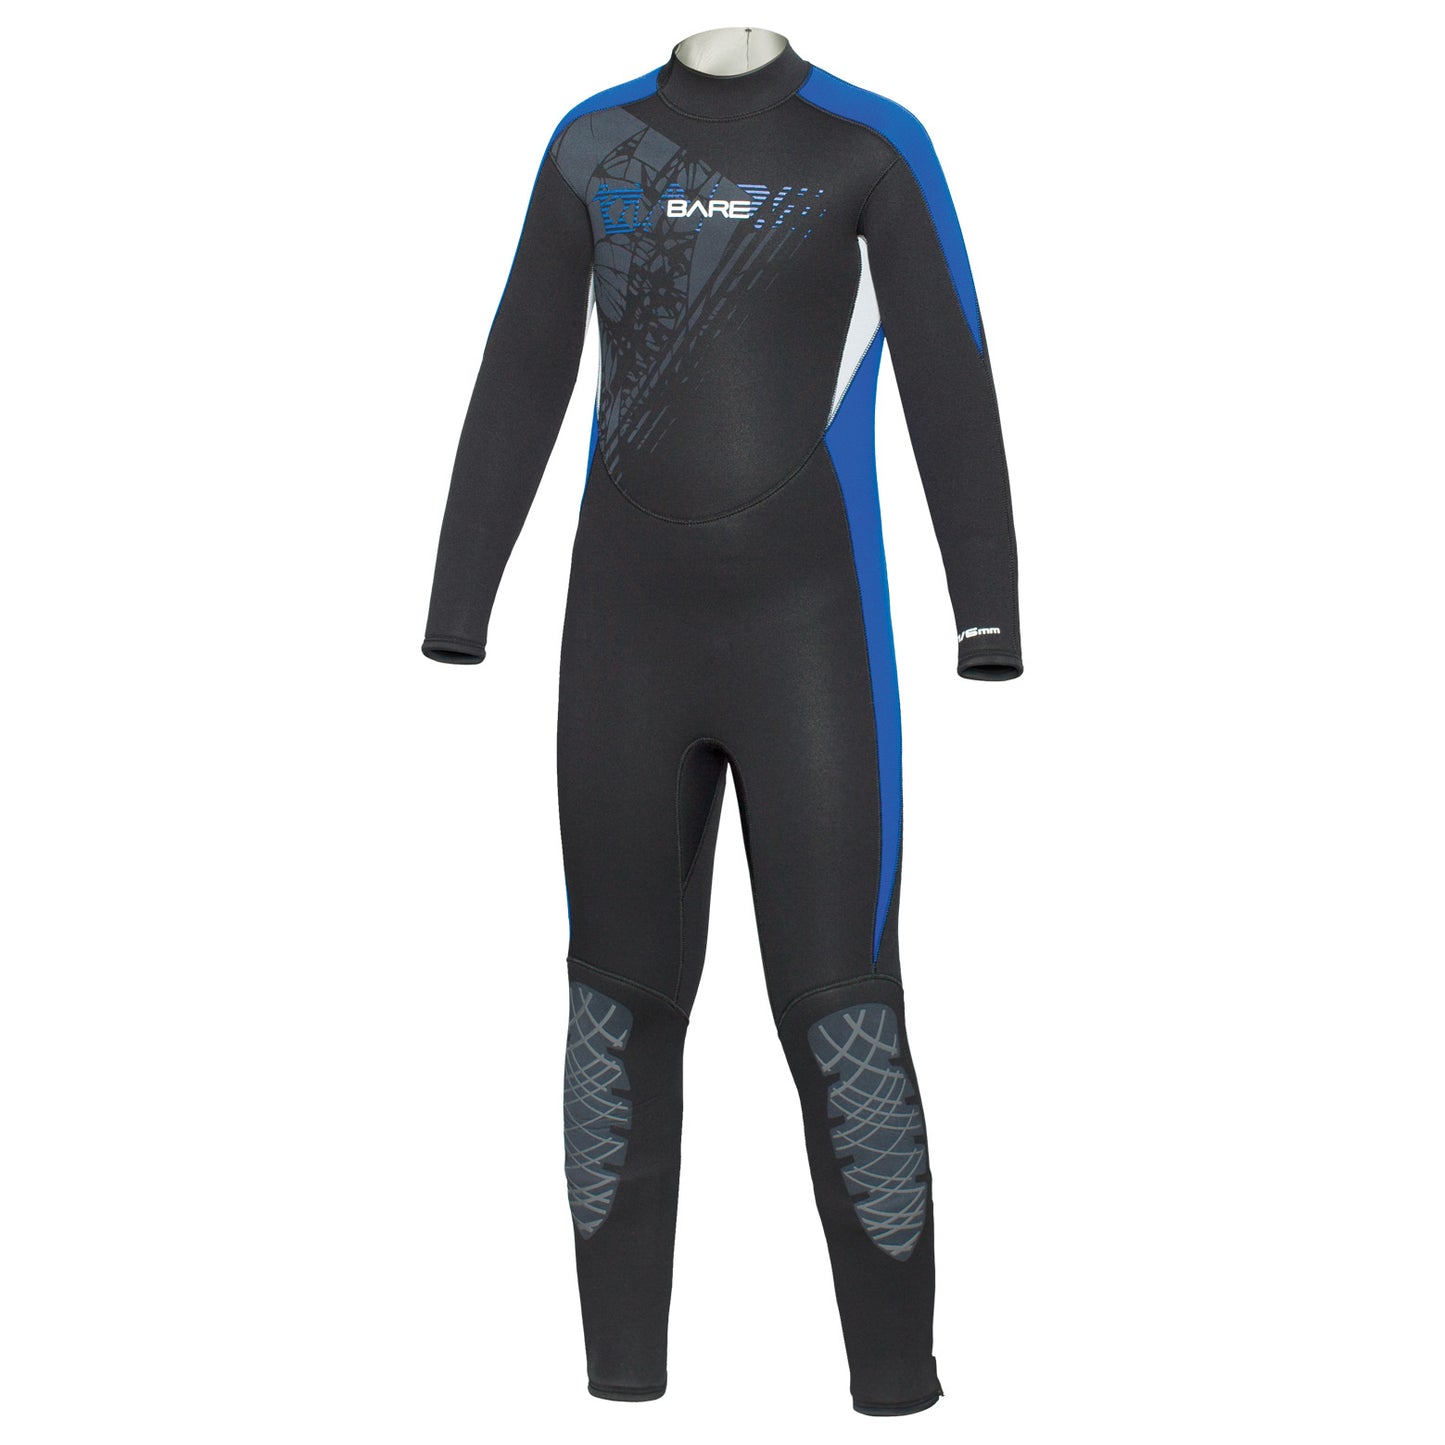 ONLY Manta 5/4mm junior suit 8-16 years